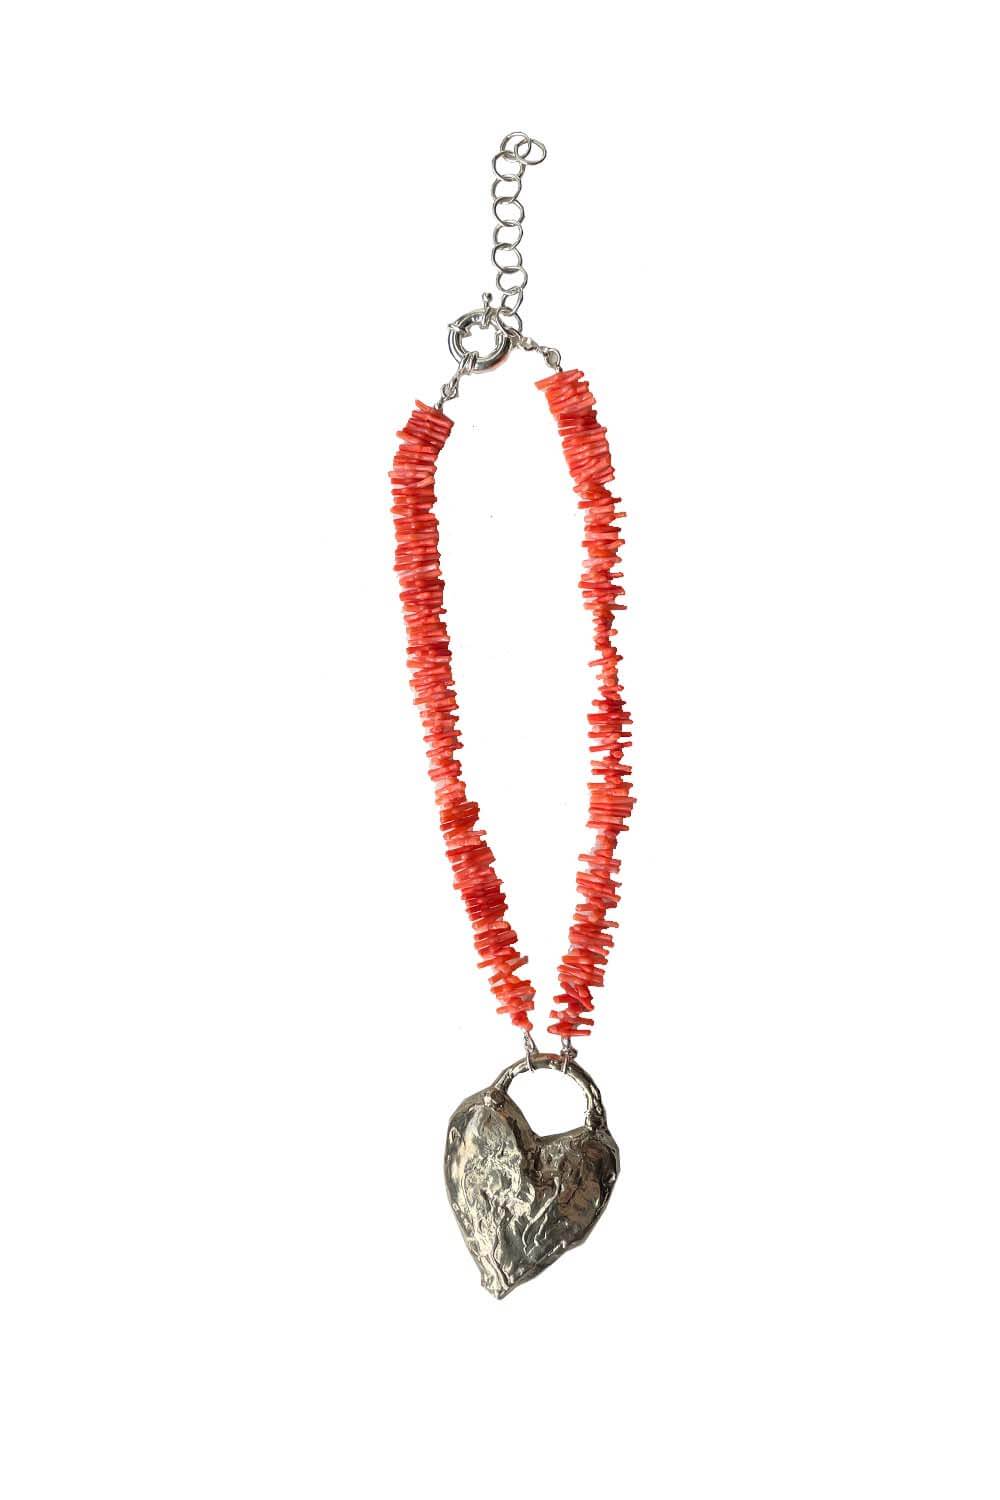 The coral heart necklace